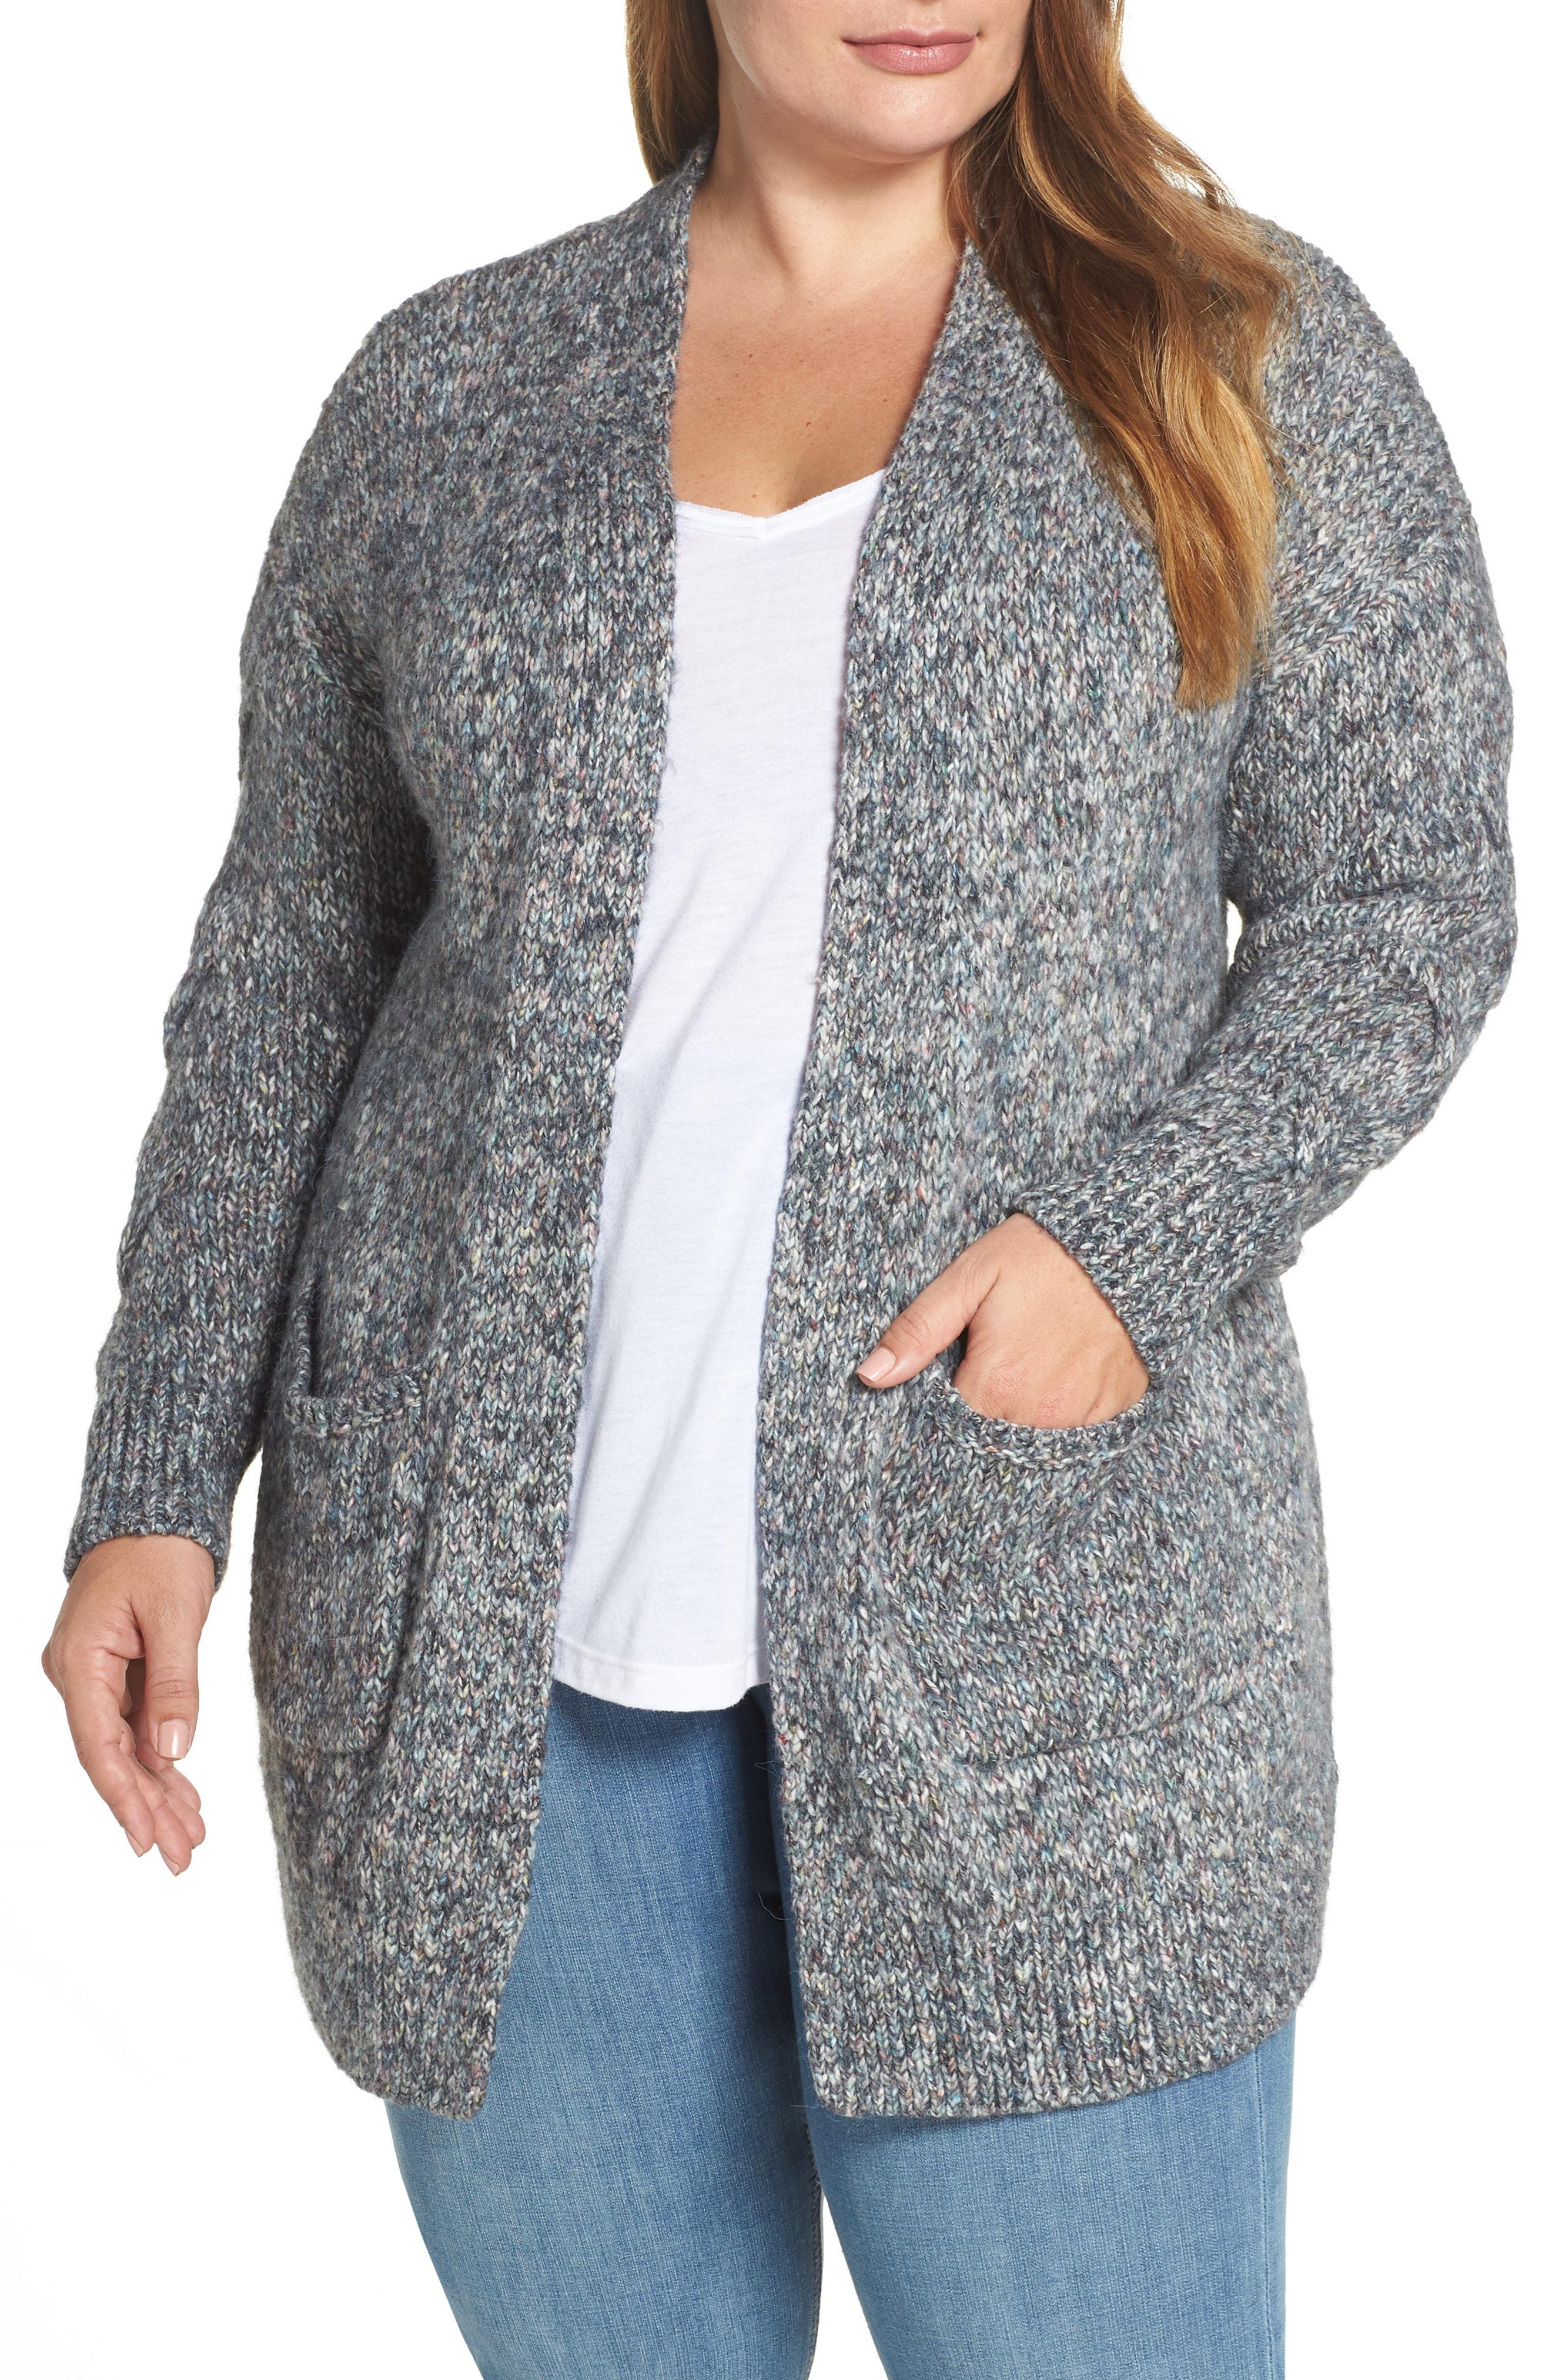 Lucky Brand Venice Cotton Blend Marled Cardigan - Lyst